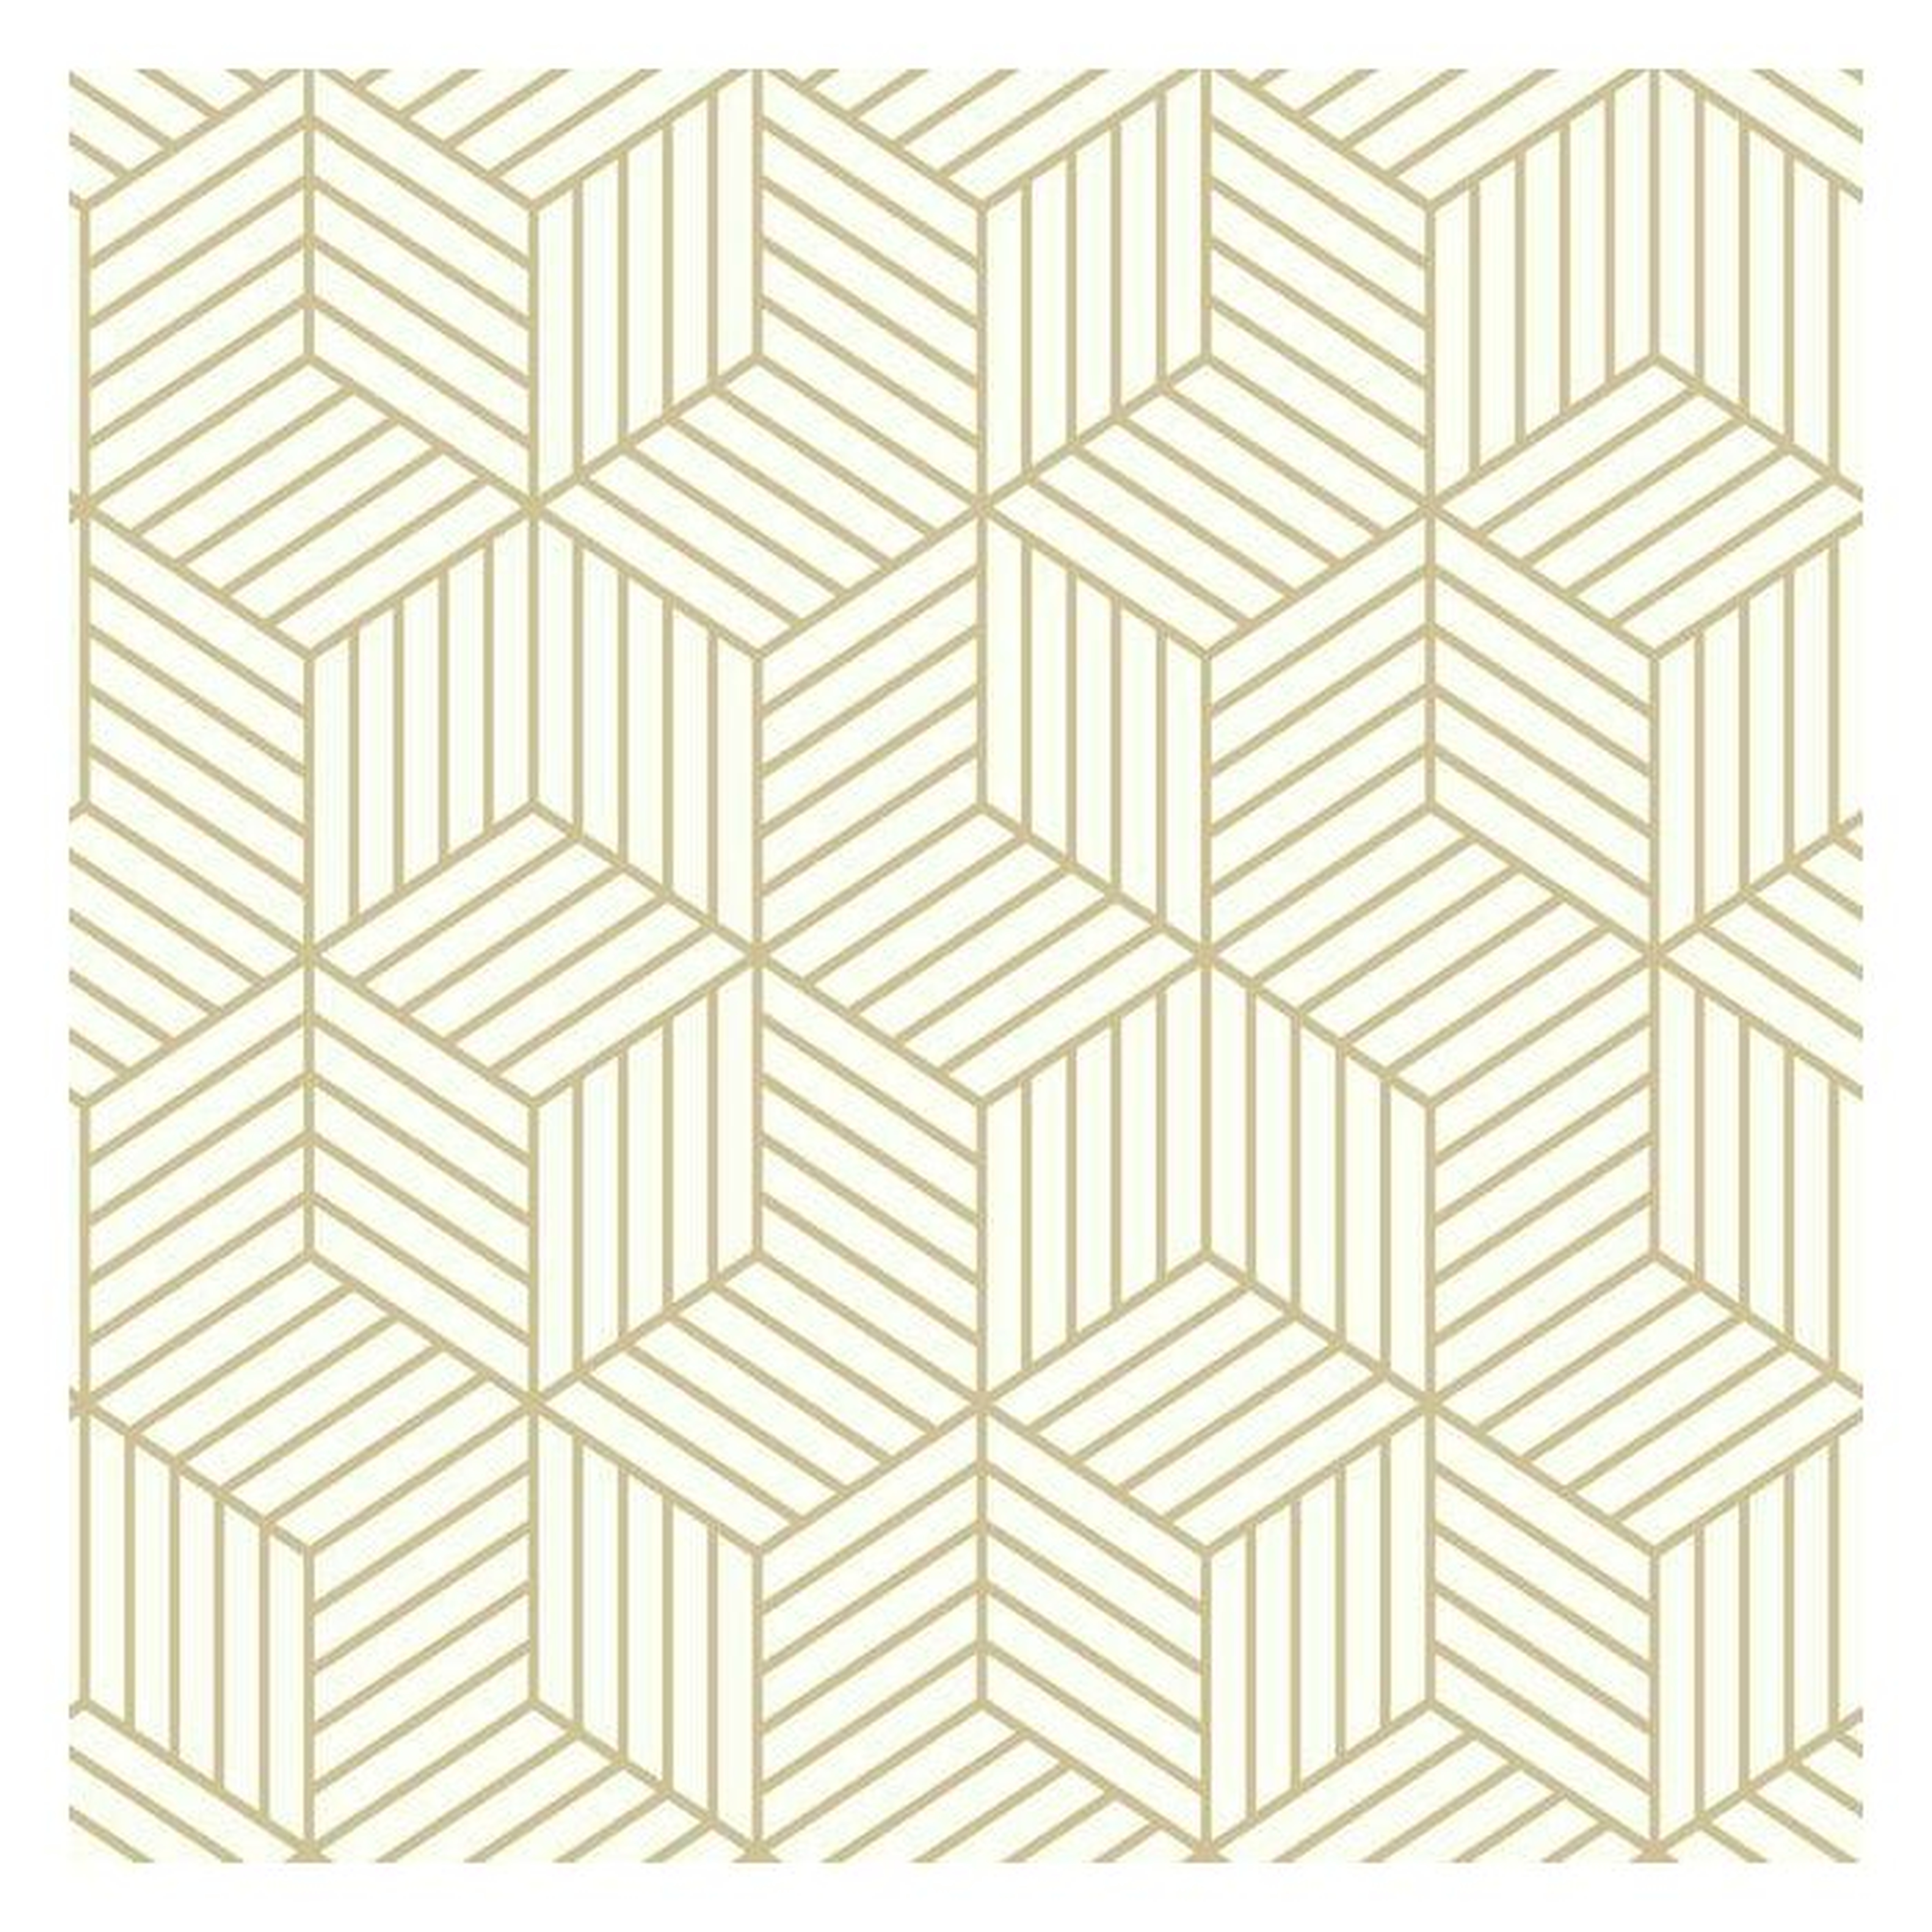 Stripped Hexagon Peel and Stick Wallpaper gold - York Wallcoverings